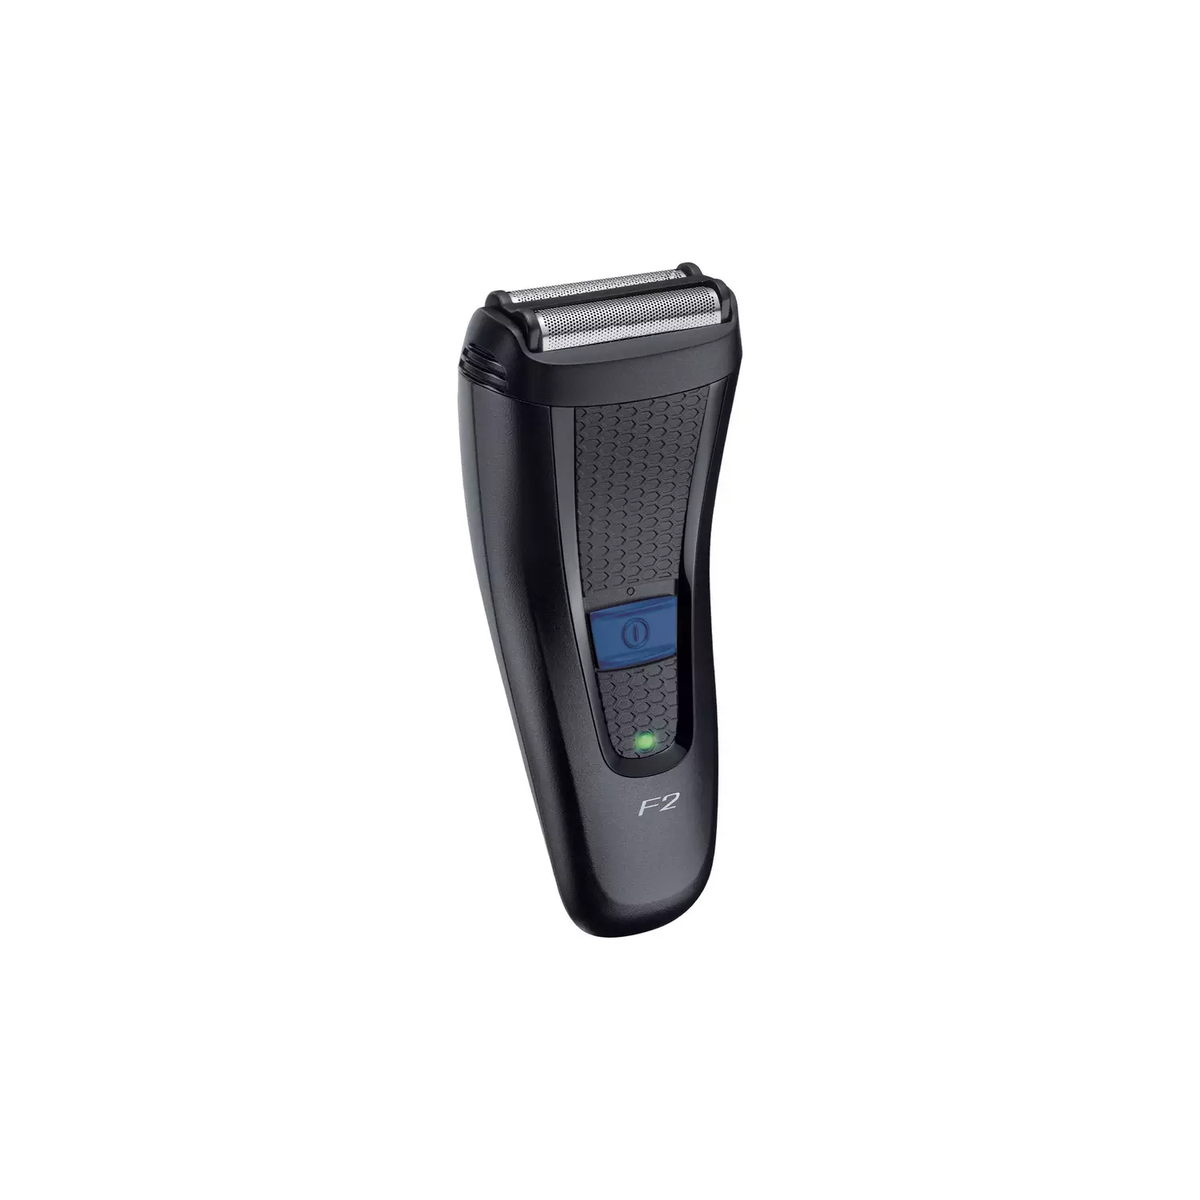 Remington F2 Style Series Foil Shaver - Black | F2002 from Remington - DID Electrical